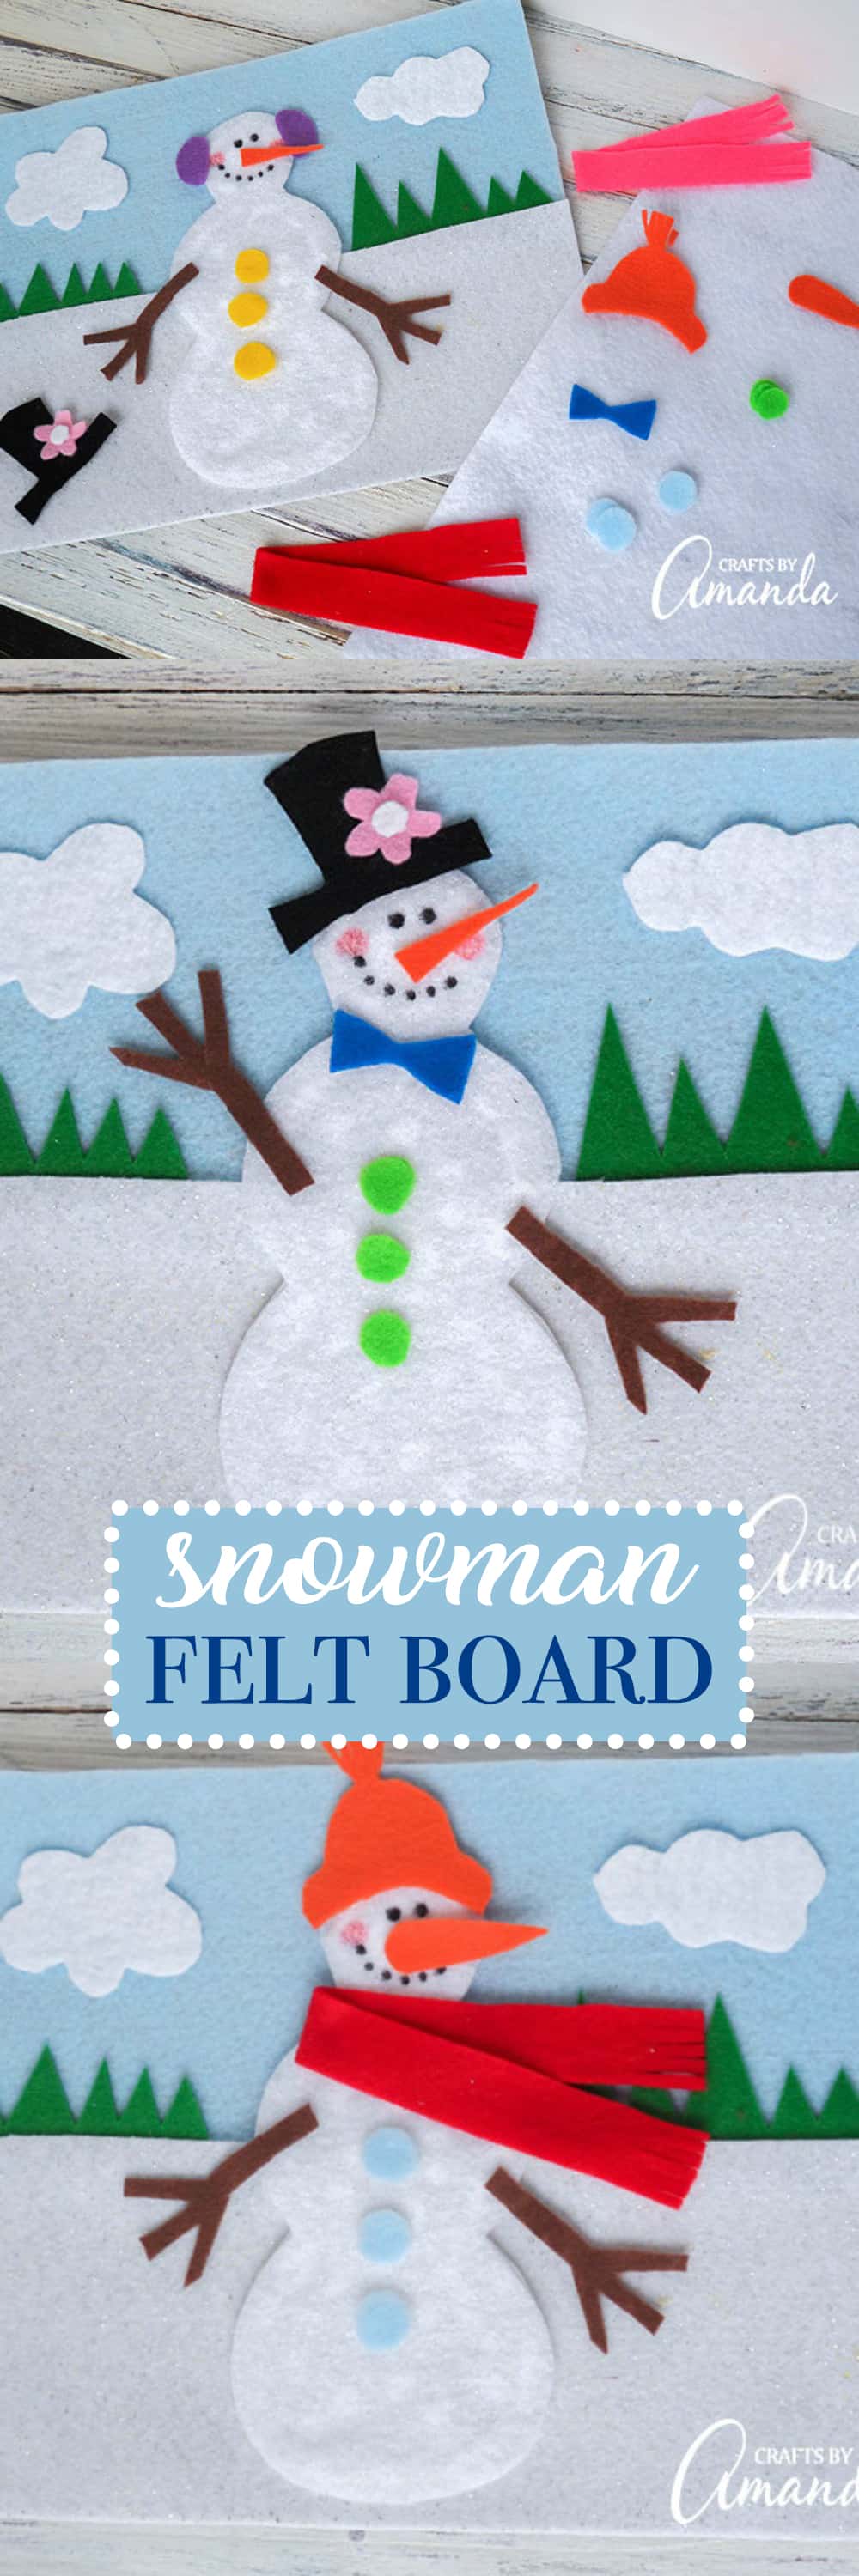 Who doesn't love cute snowman crafts? Snowman crafts are popular because they are easy to make your own. A felt board is a great way to engage little ones.